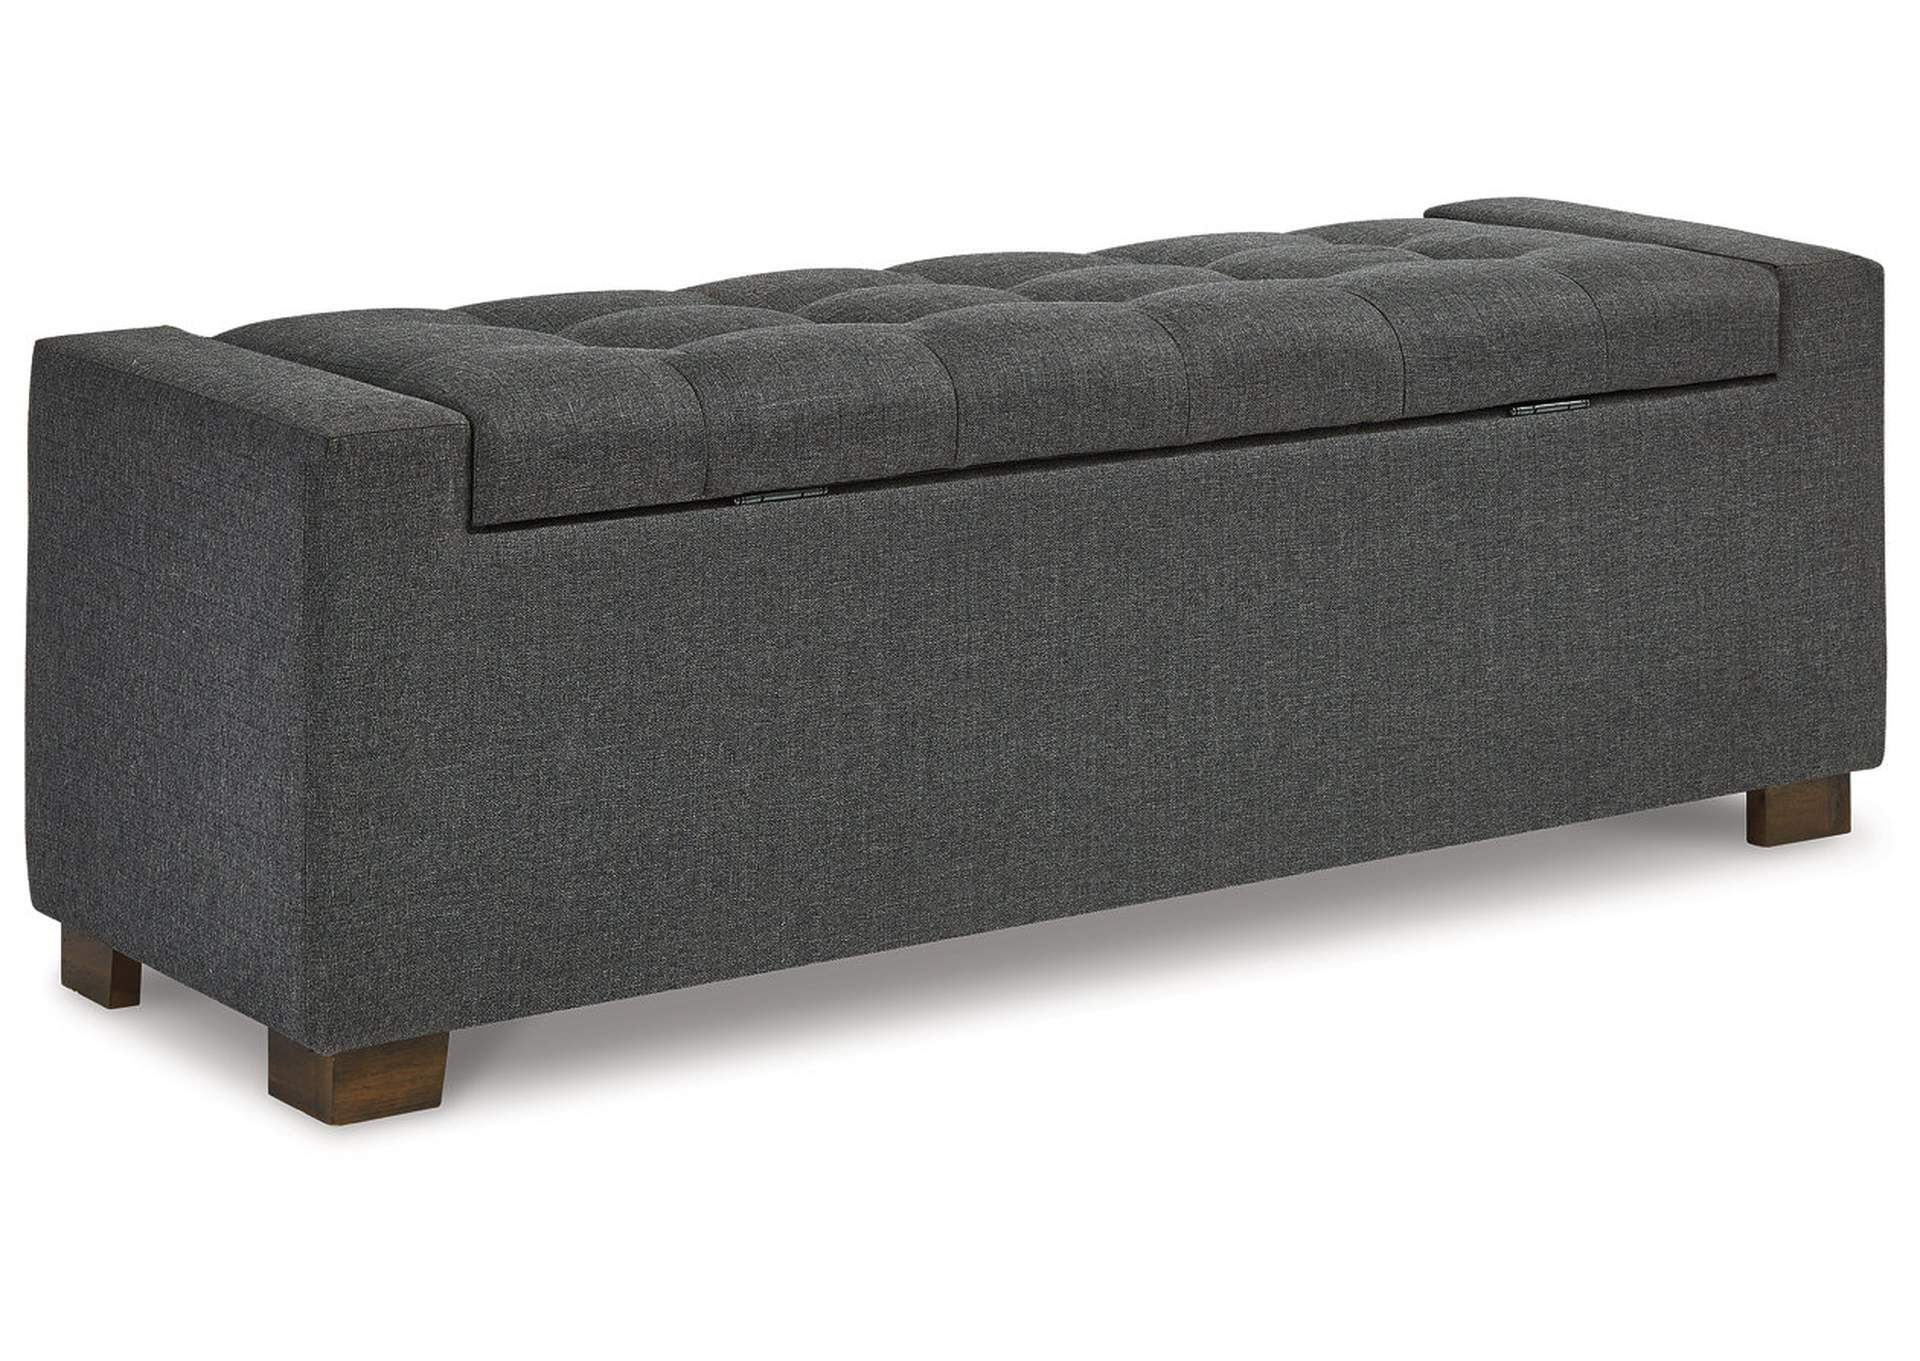 Cortwell Storage Bench,Direct To Consumer Express